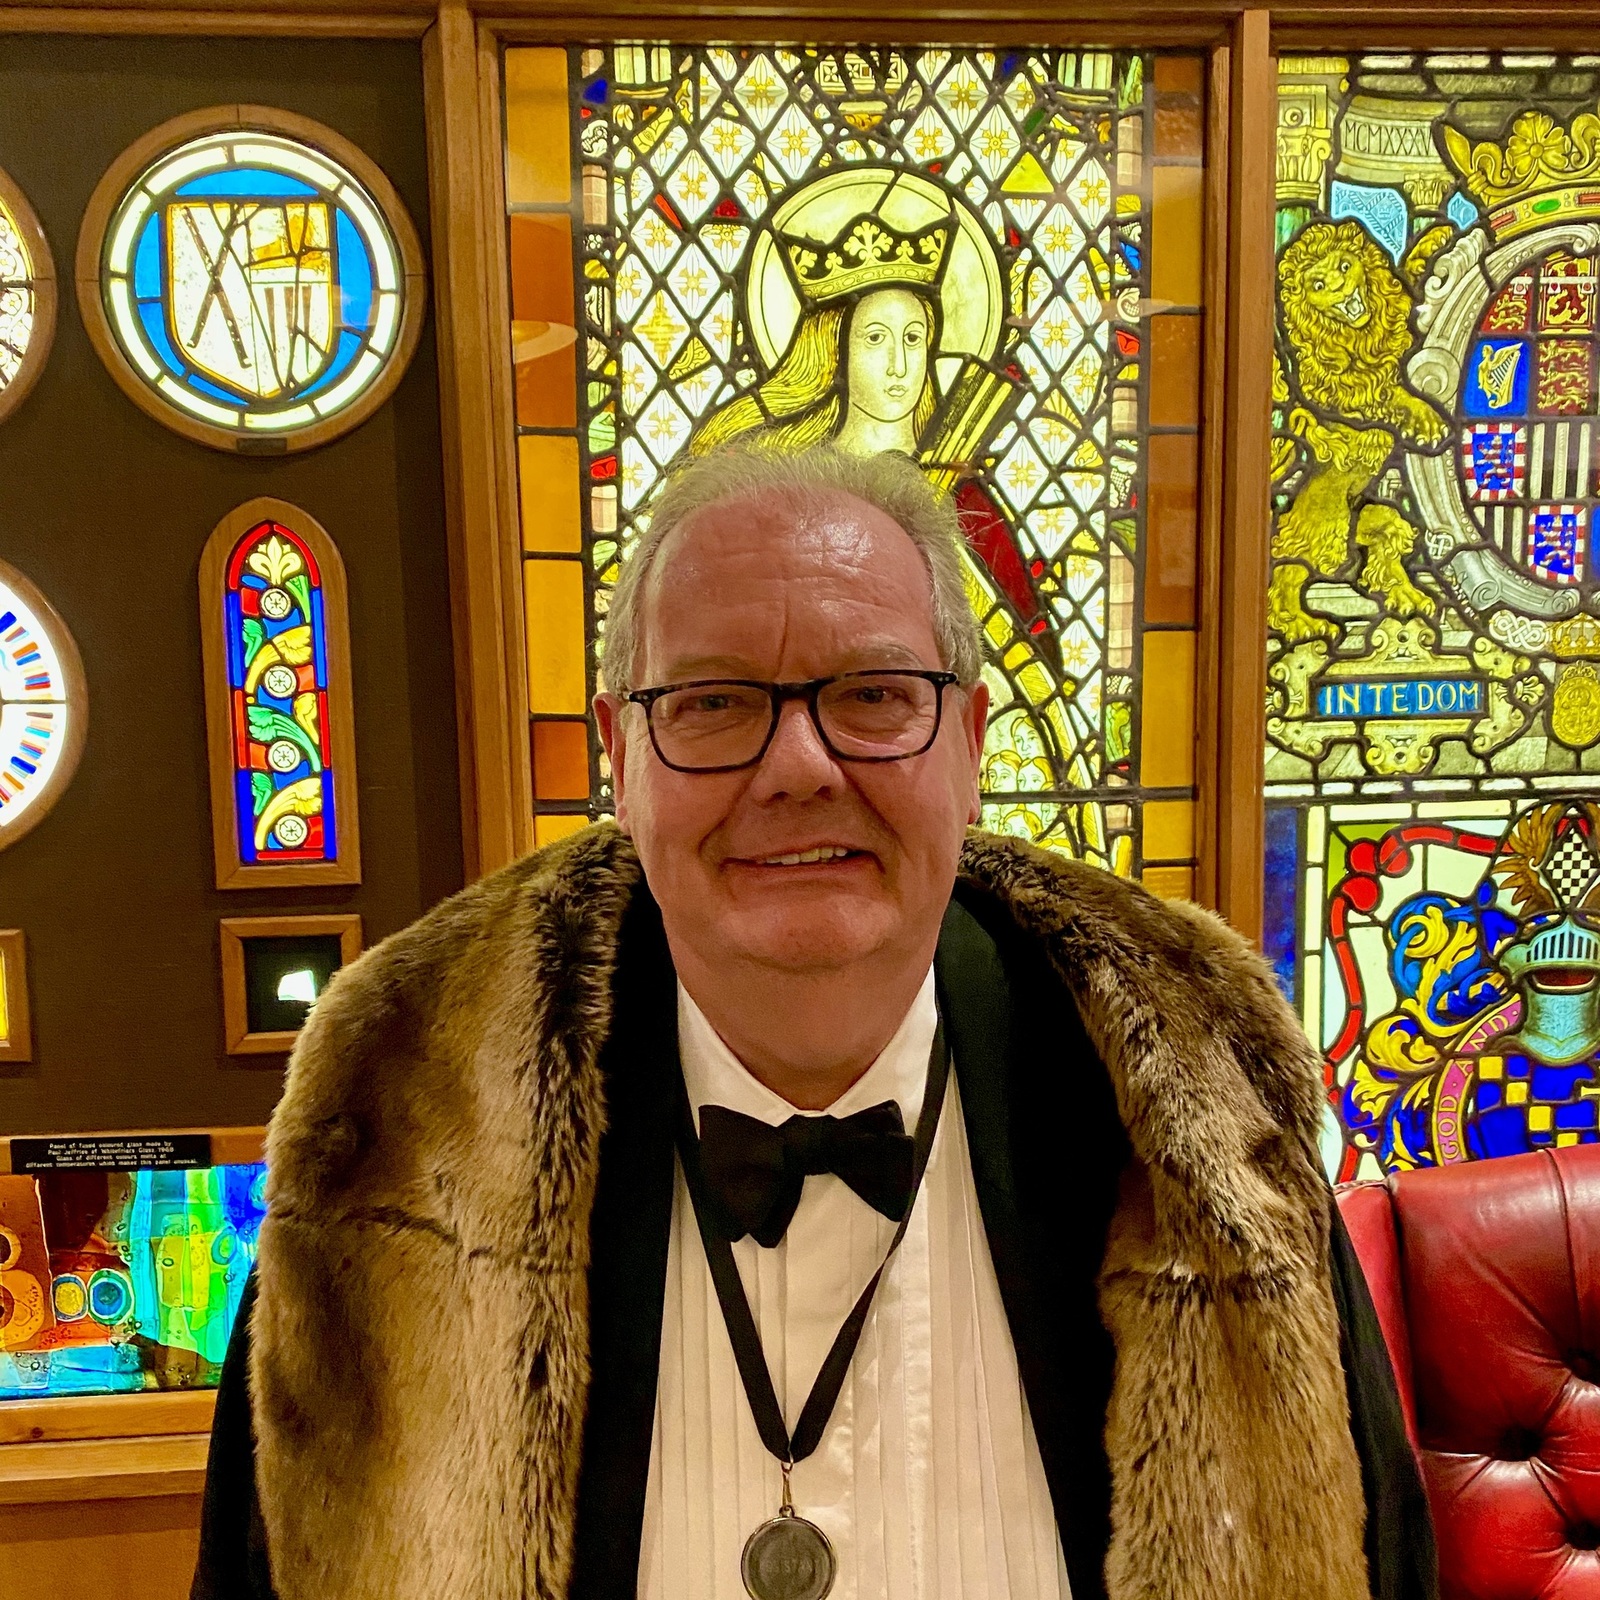 Following my virtual admission some two years ago, delighted to be the first person to be physically clothed in the Livery of the Glaziers in a subsequent and newly adapted ceremony